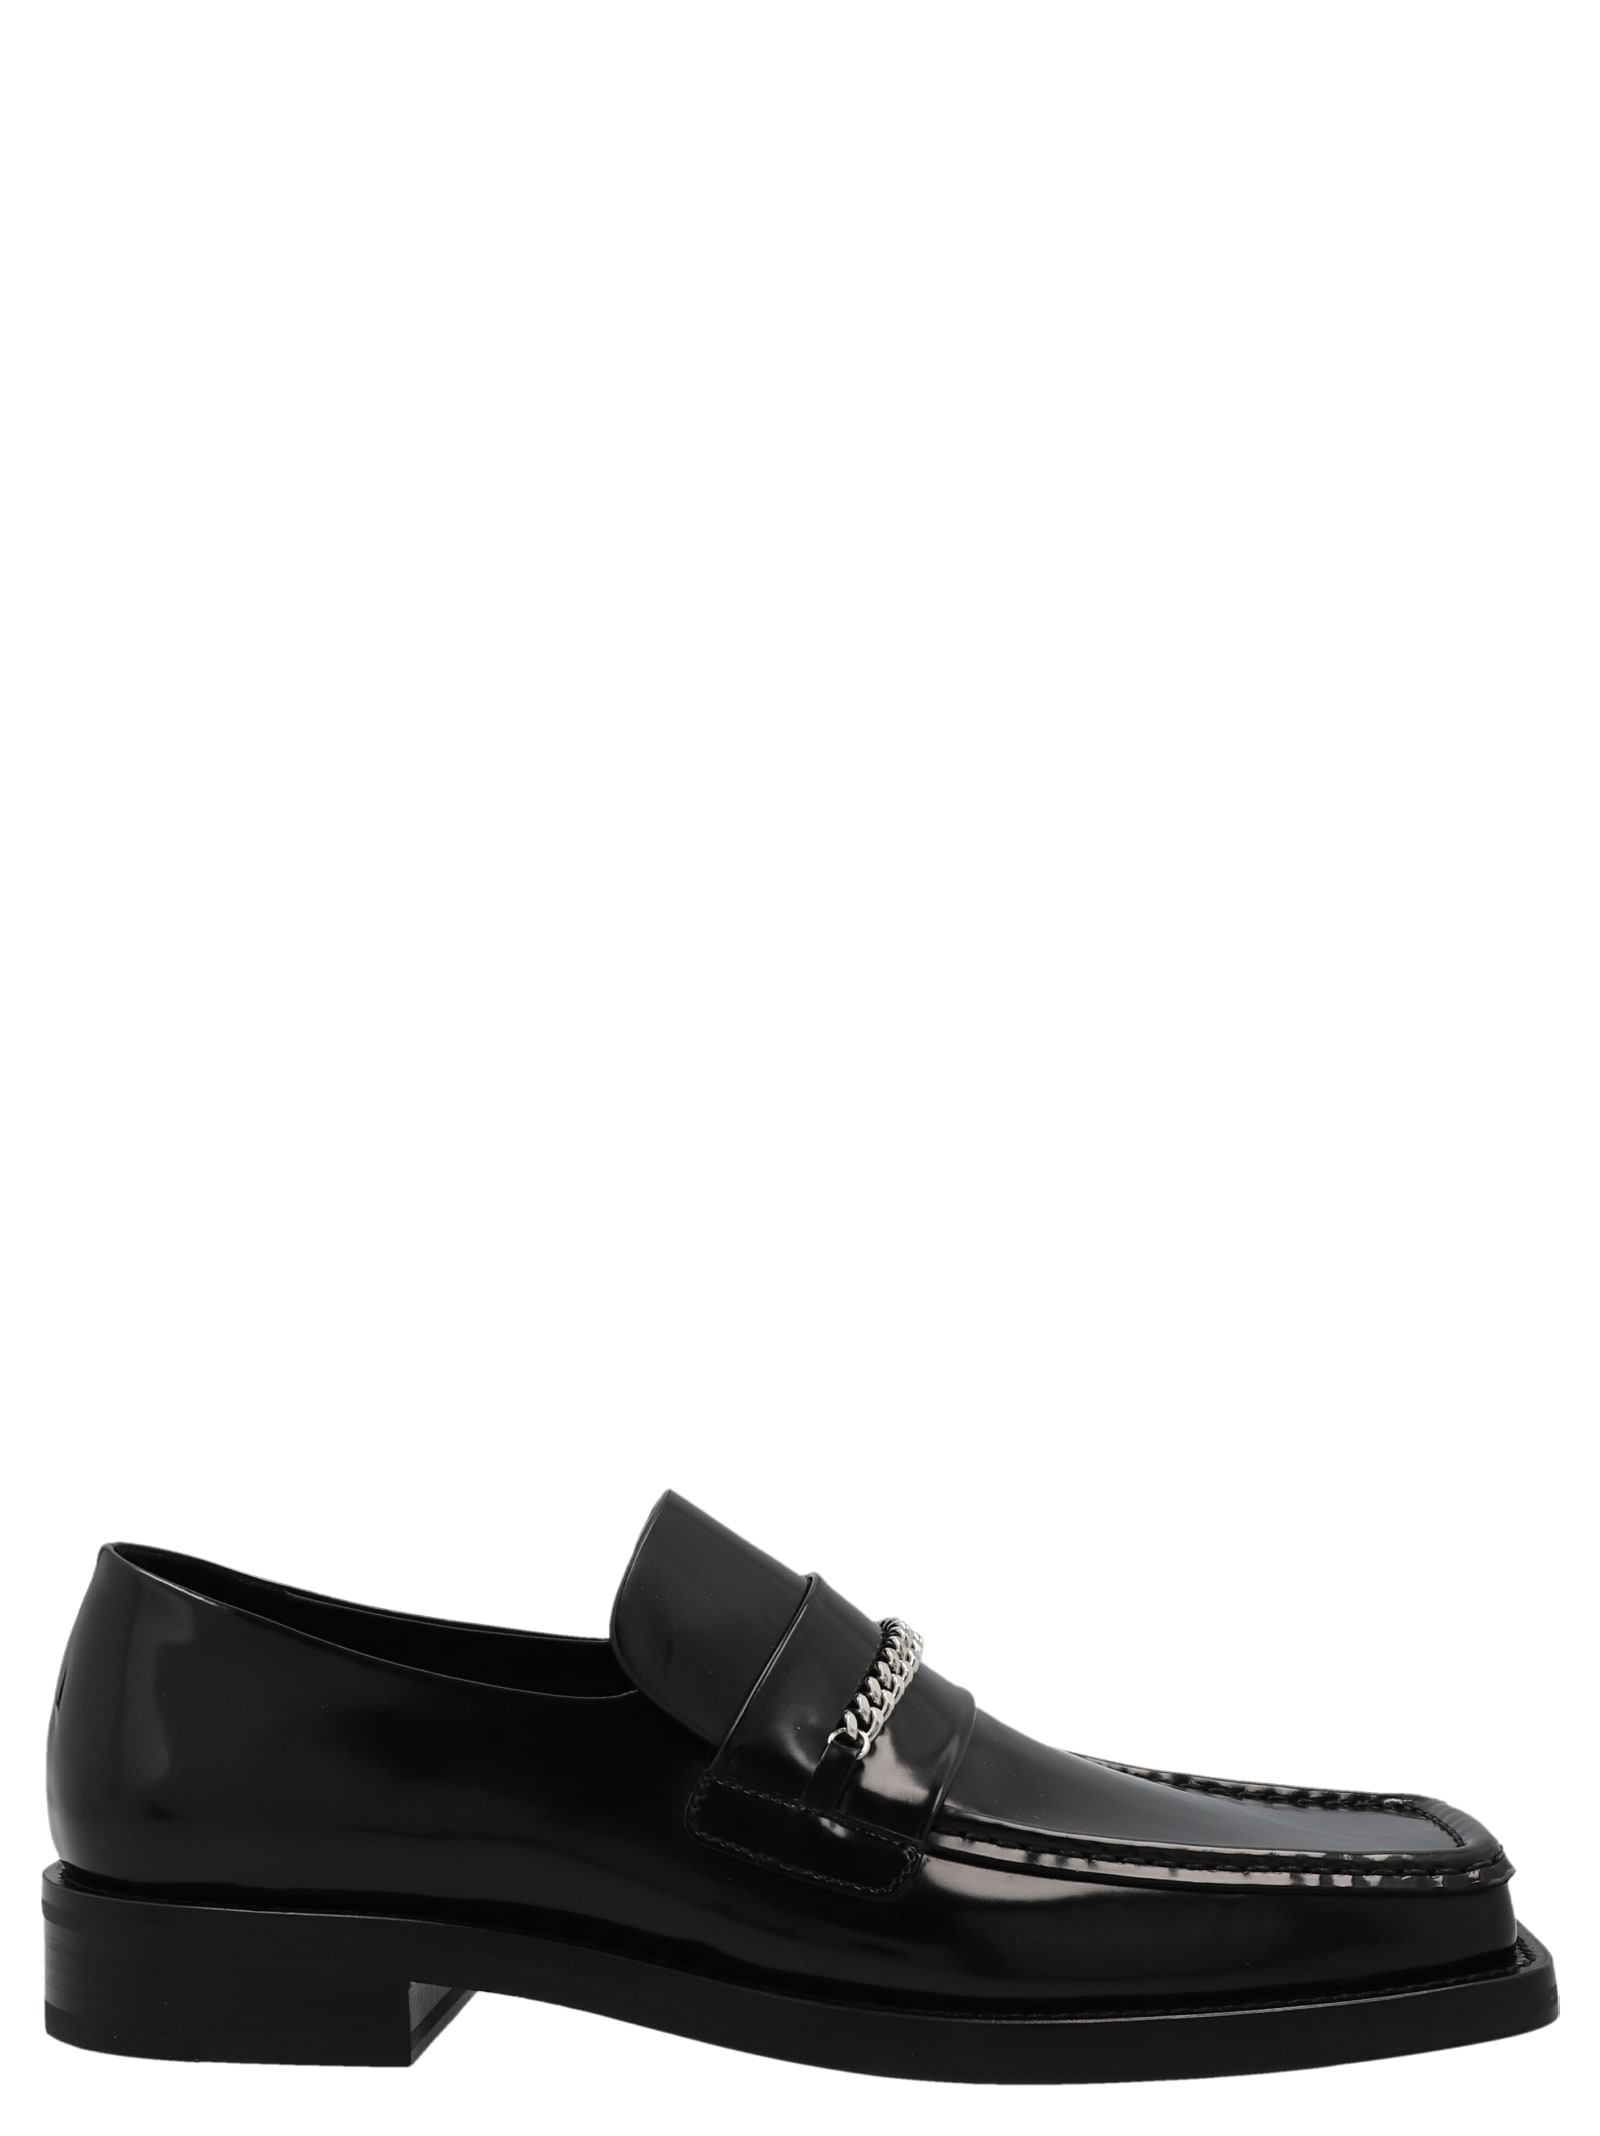 Martine Rose Chain Leather Loafers